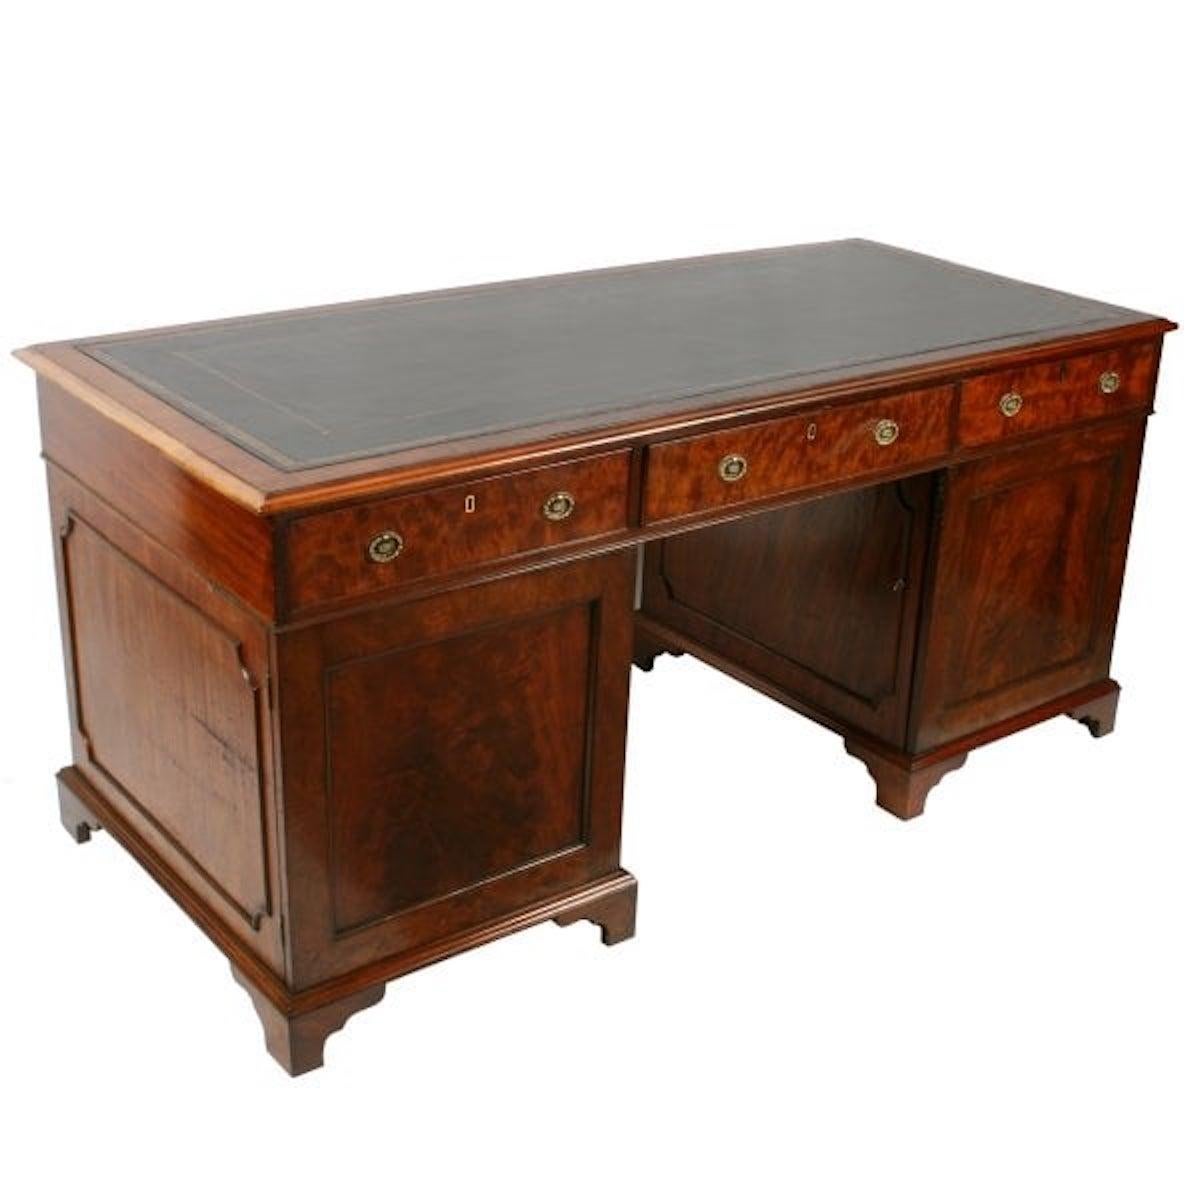 Georgian Mahogany pedestal desk

An 18th century Georgian mahogany pedestal desk.

The desk has a gold tooled black leather writing surface, three drawers across the front and two cupboards.

The left hand cupboard has four drawers inside and